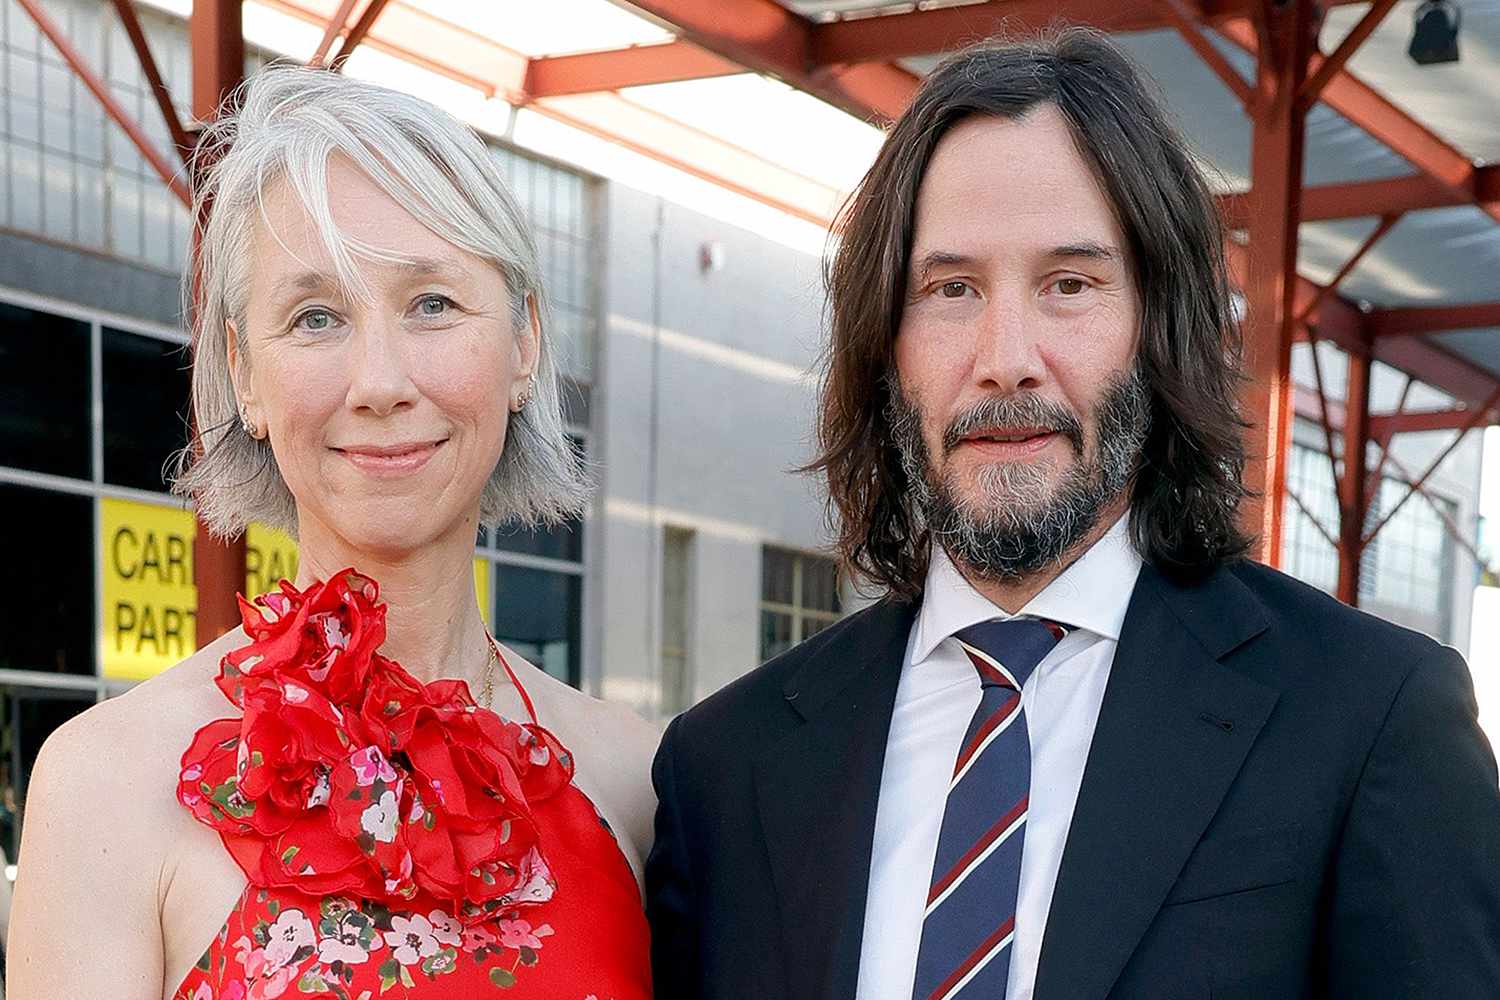 Alexandra Grant Opens Up About 'Kind' Boyfriend Keanu Reeves: 'He's Such an Inspiration to Me'